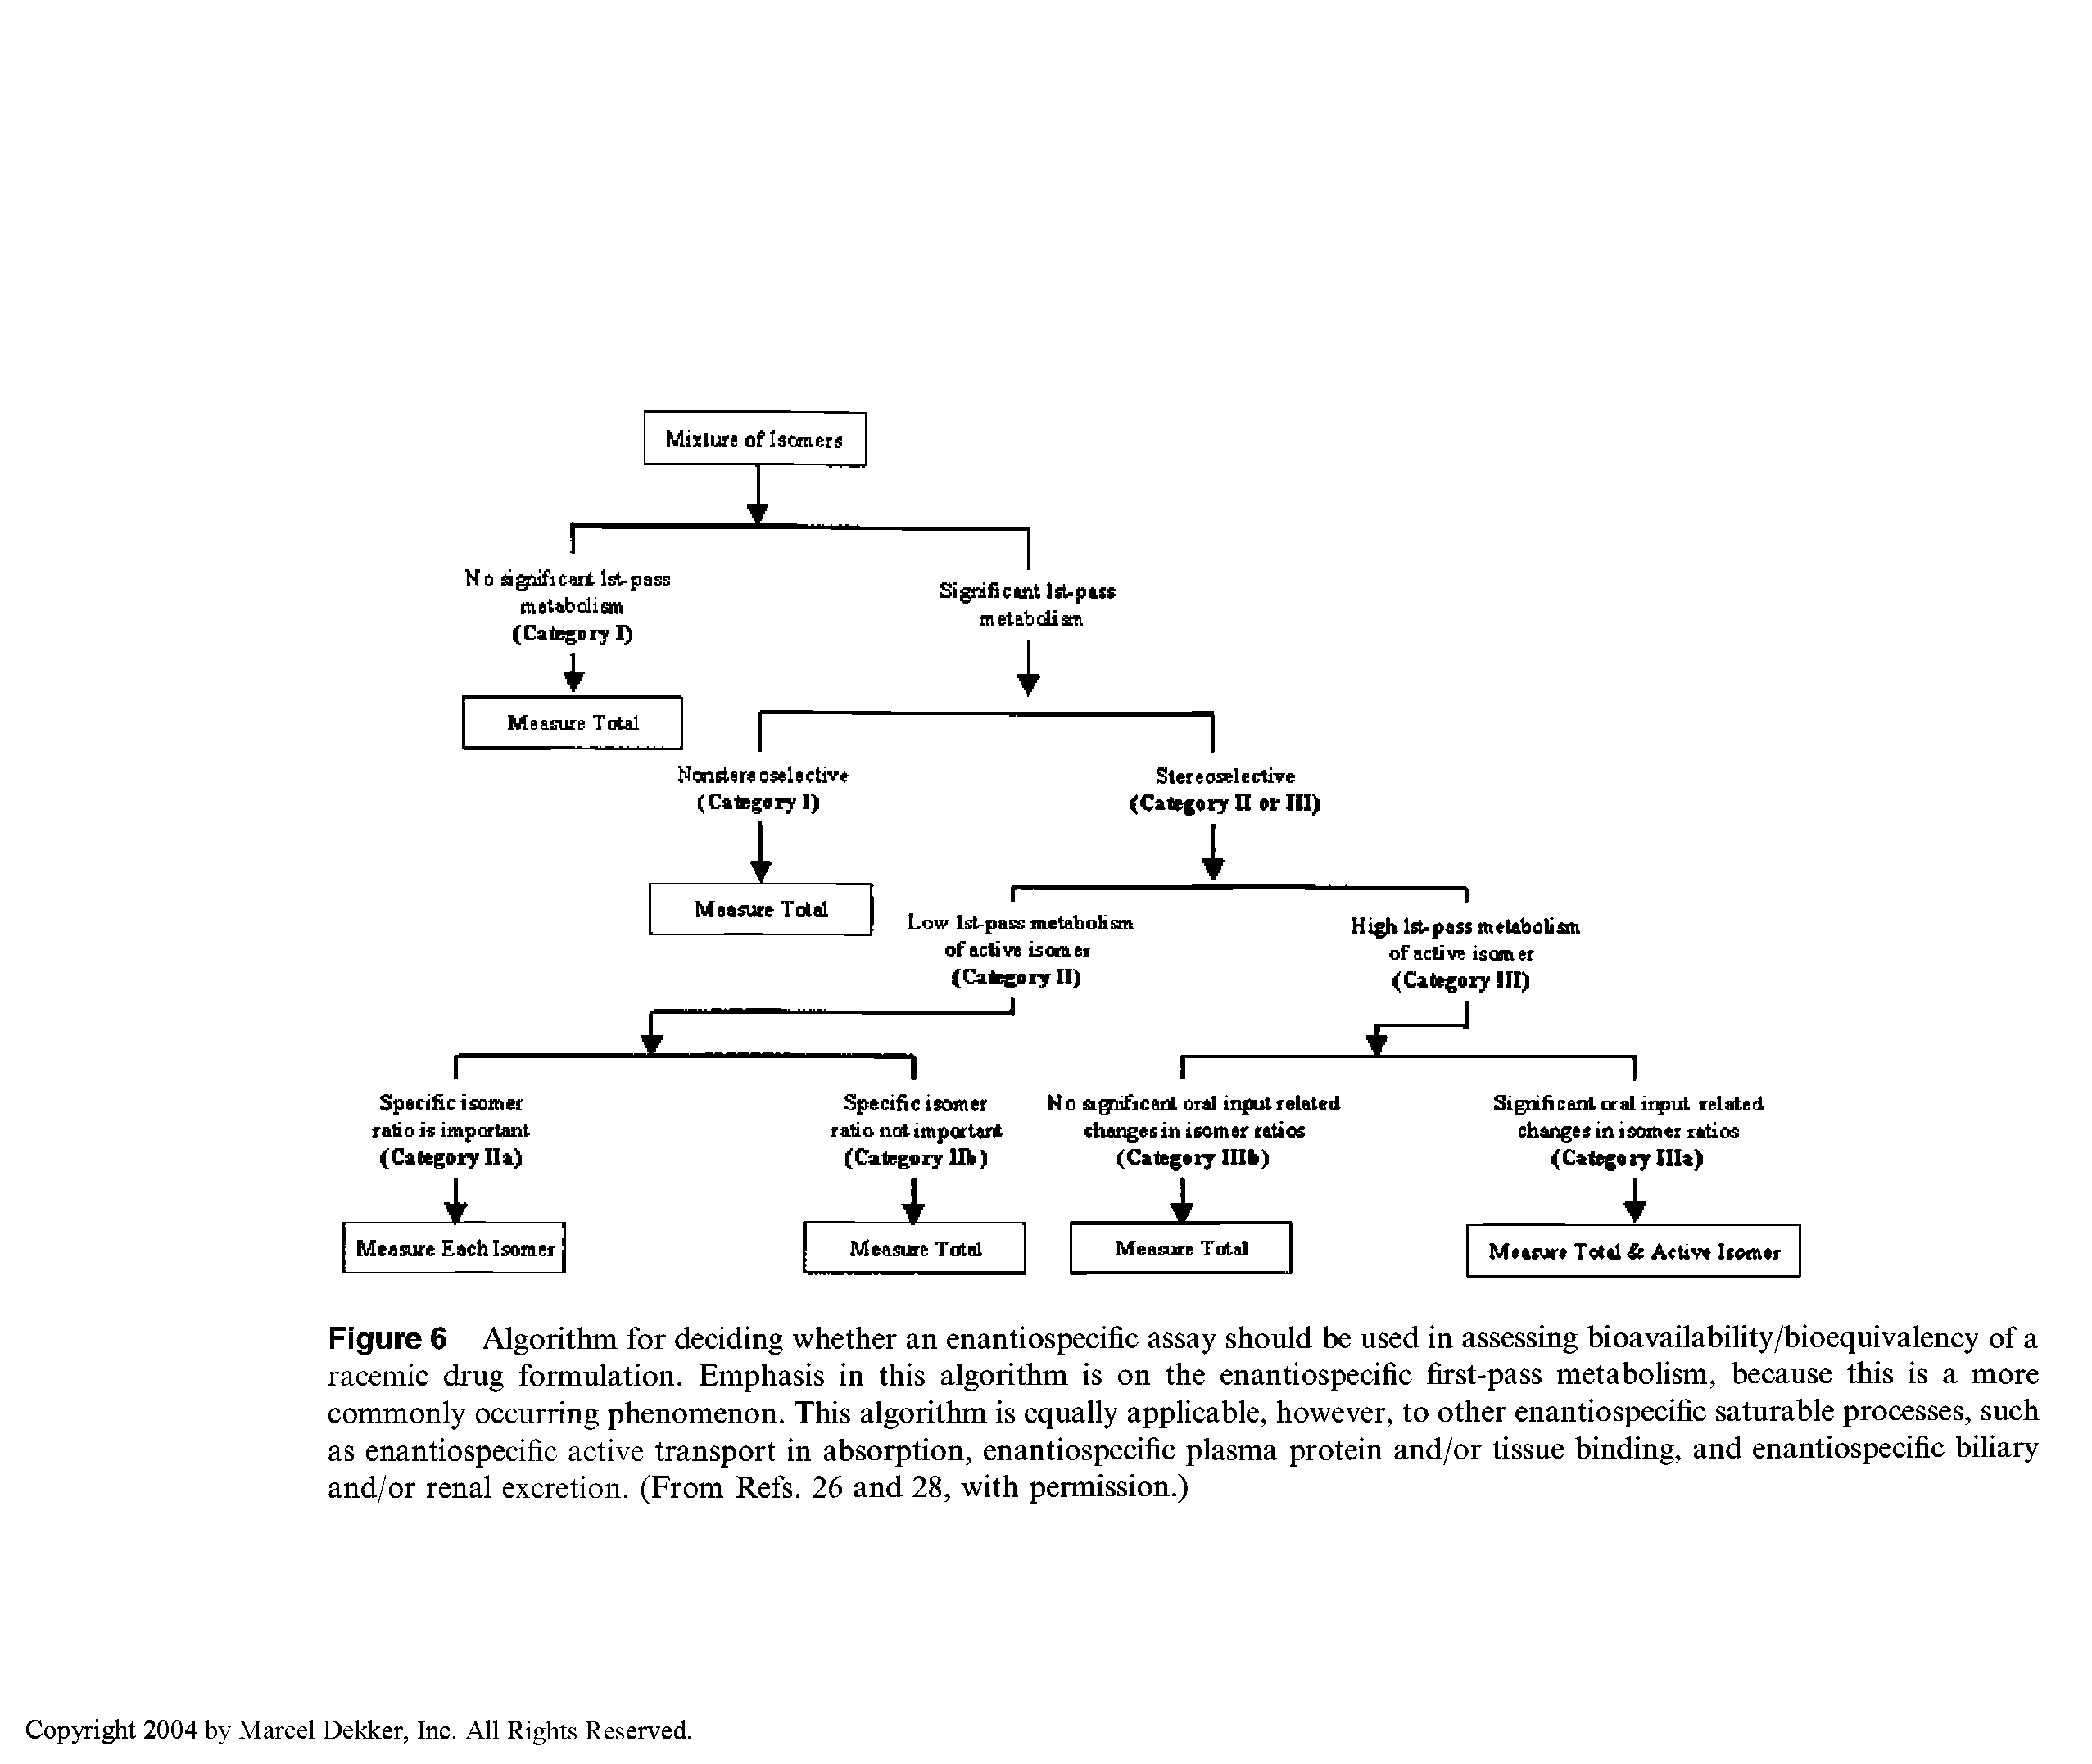 Figure 6 Algorithm for deciding whether an enantiospecific assay should be used in assessing bioavailability/bioequivalency of a racemic drug formulation. Emphasis in this algorithm is on the enantiospecific first-pass metabolism, because this is a more commonly occurring phenomenon. This algorithm is equally applicable, however, to other enantiospecific saturable processes, such as enantiospecific active transport in absorption, enantiospecific plasma protein and/or tissue binding, and enantiospecific biliary and/or renal excretion. (From Refs. 26 and 28, with permission.)...